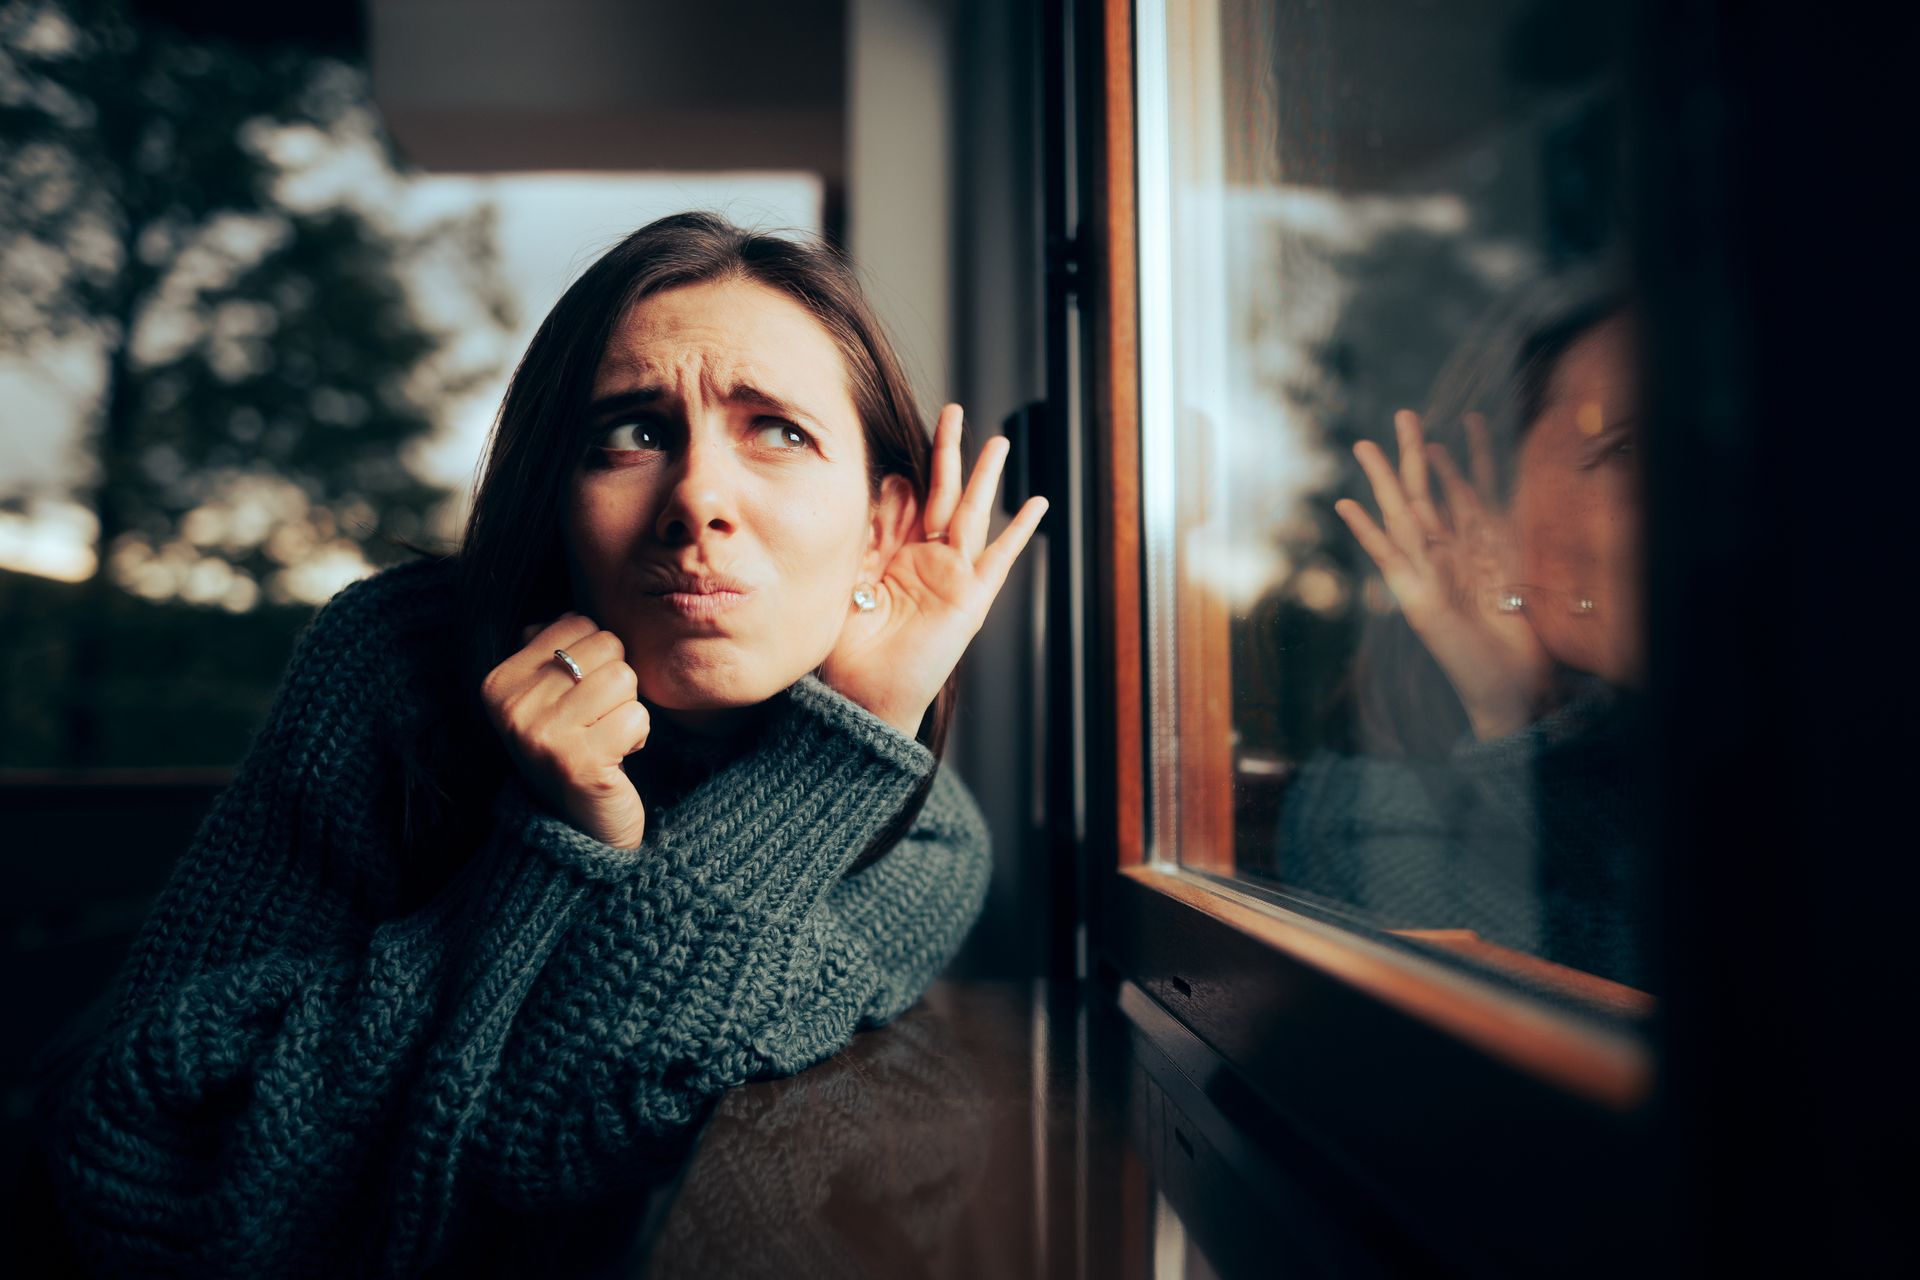 a woman is looking out of a window with her hand on her face listening to outdoor noise